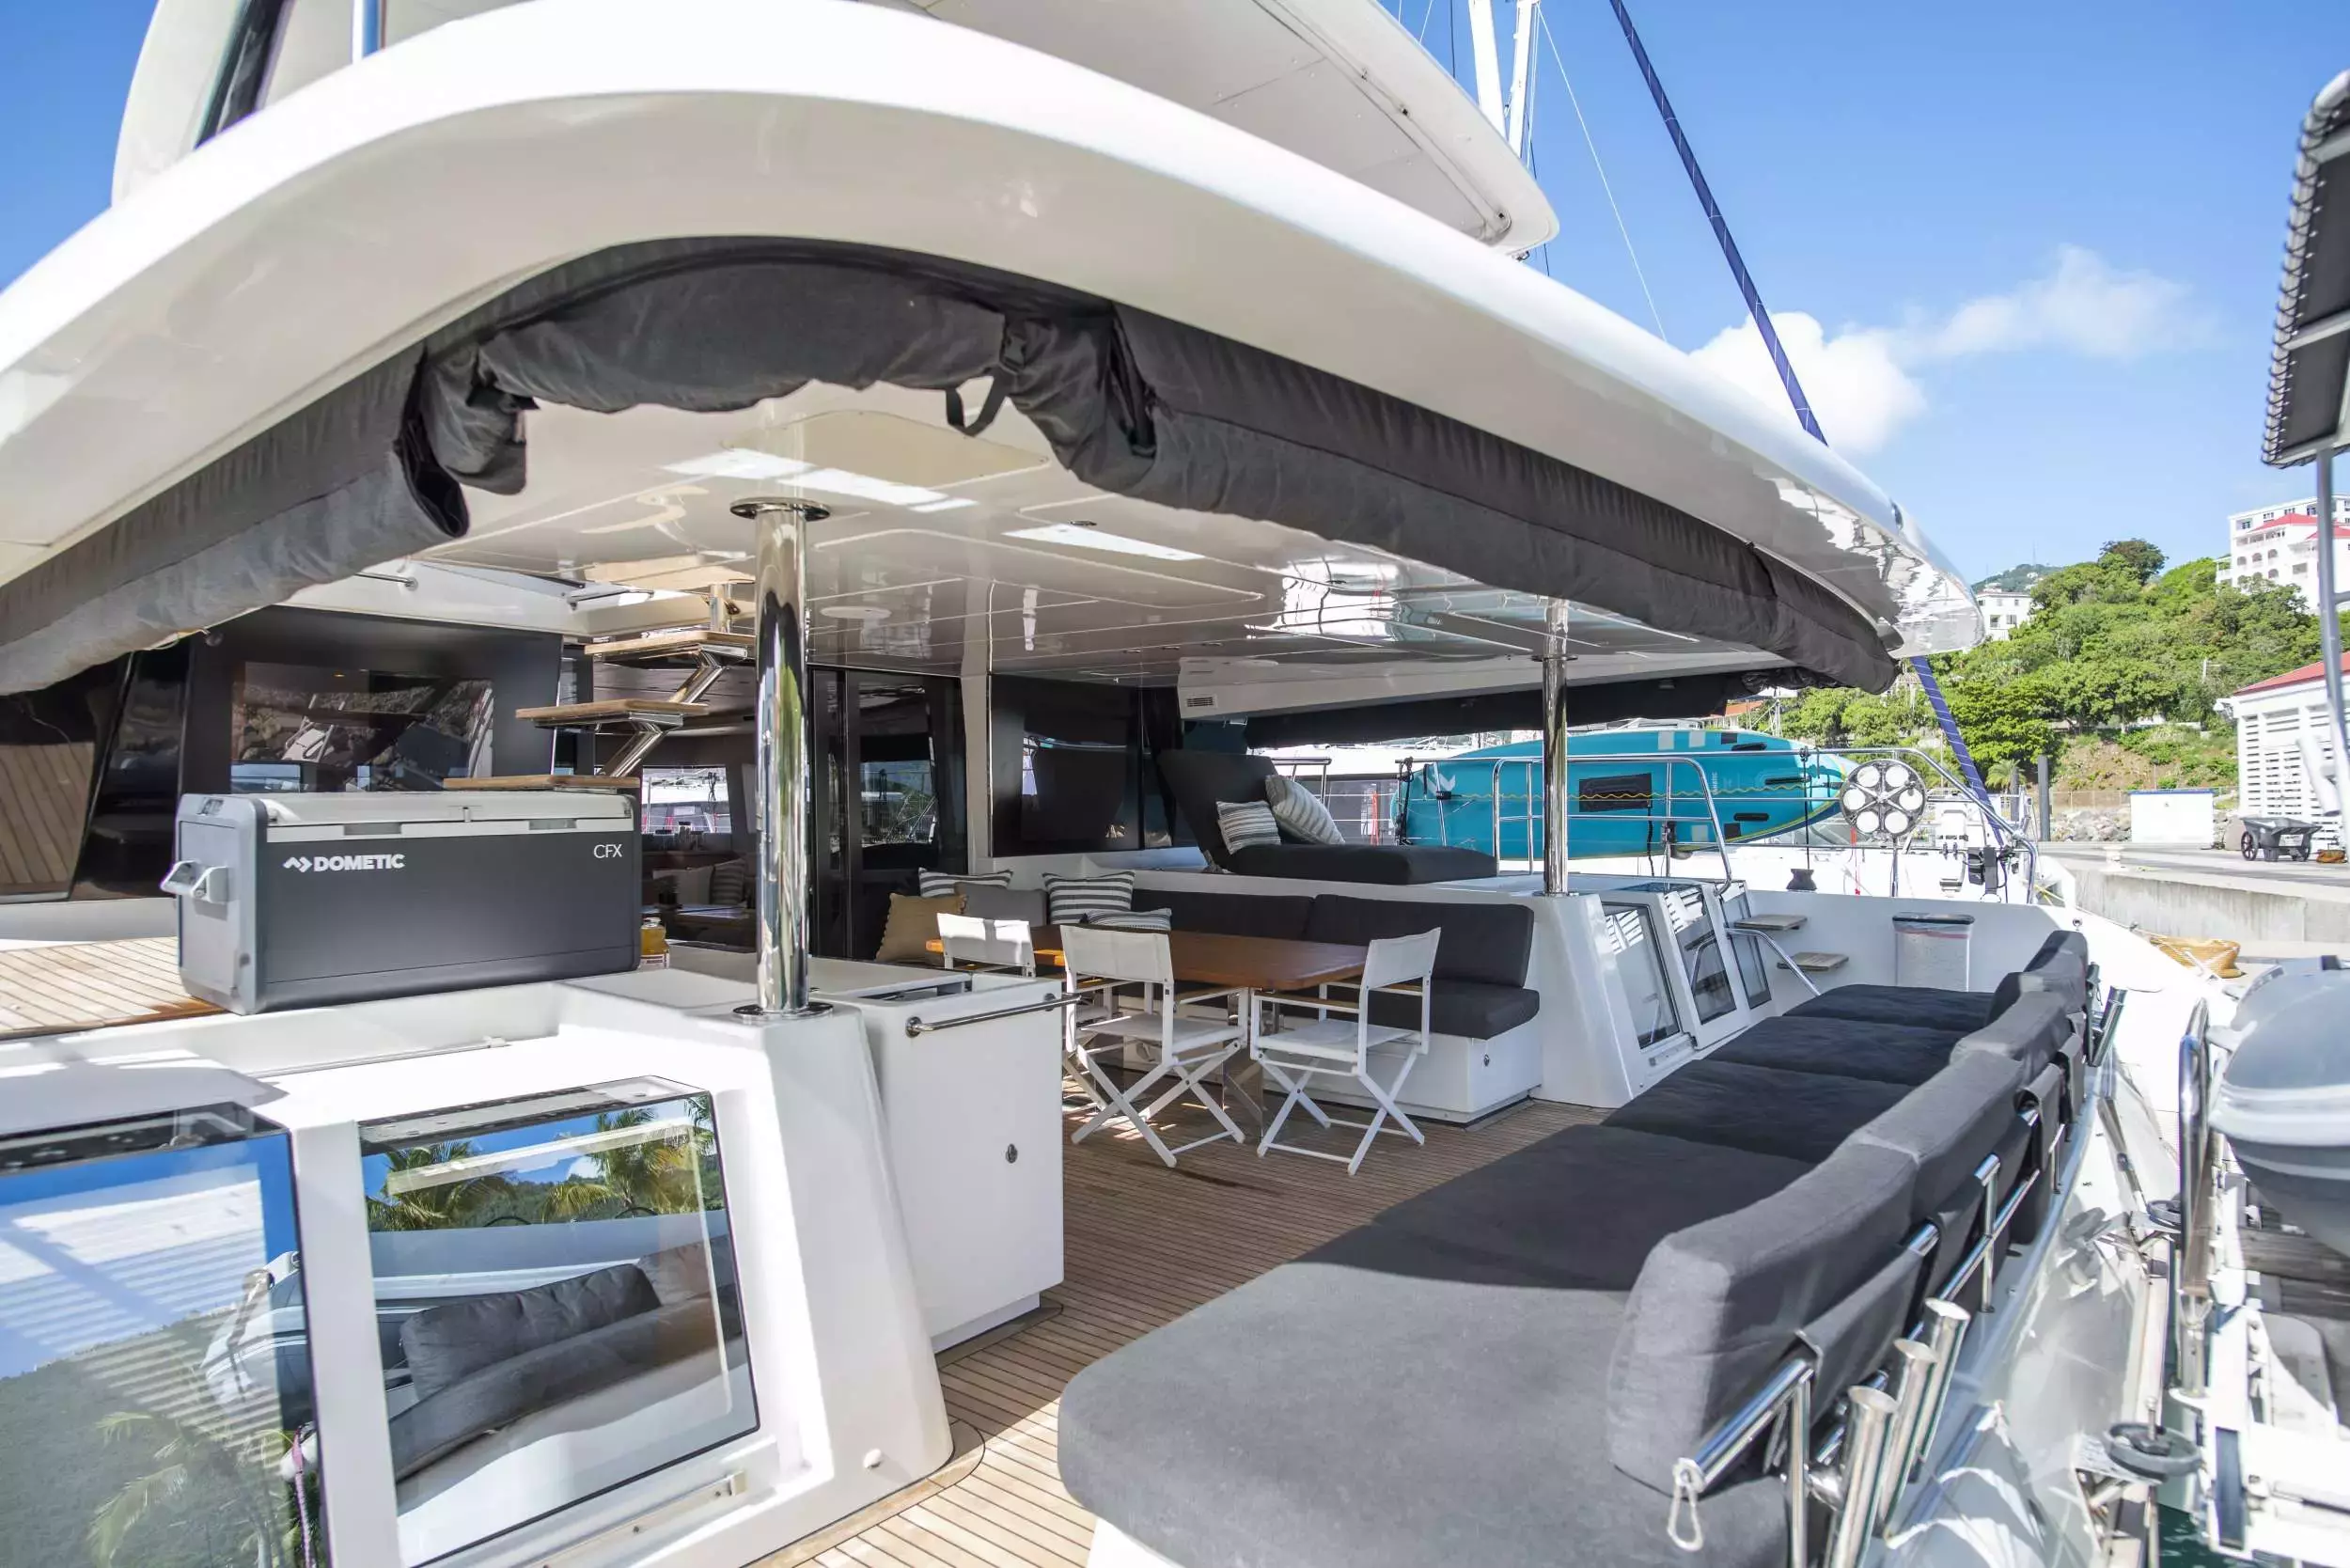 Colette by Lagoon - Top rates for a Charter of a private Power Catamaran in Puerto Rico